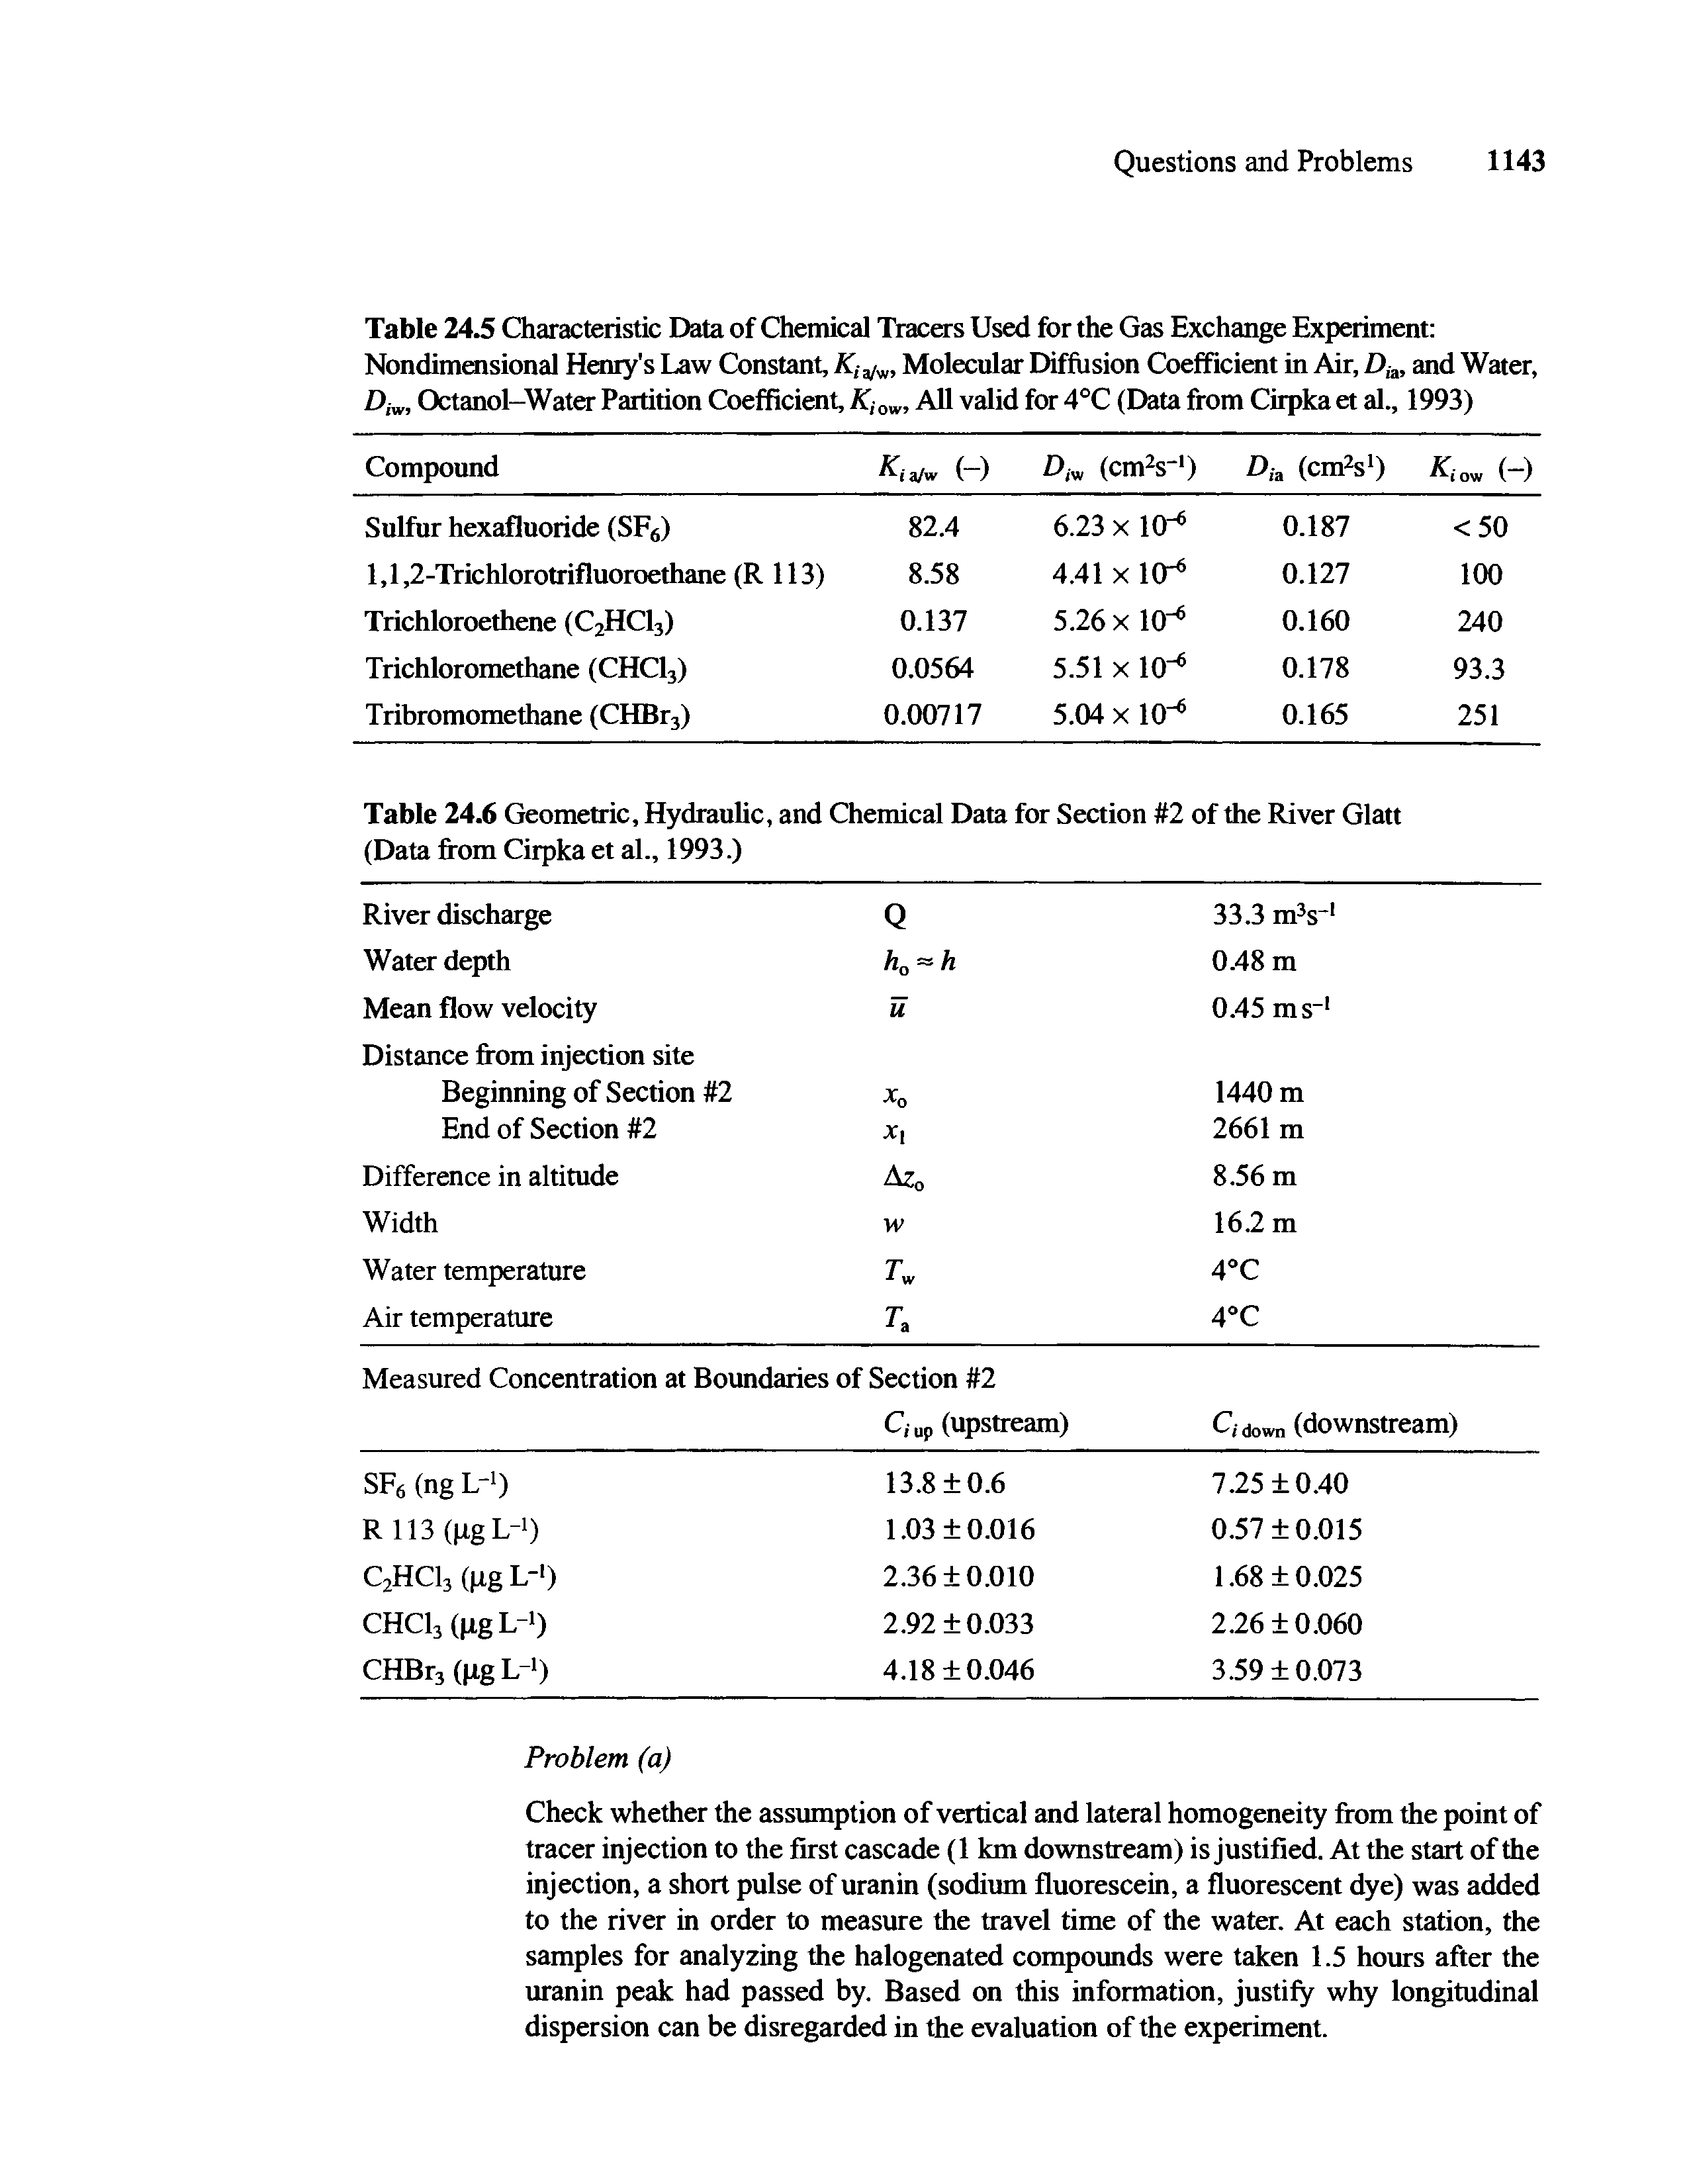 Table 24.5 Characteristic Data of Chemical Tracers Used for the Gas Exchange Experiment Nondimensional Henry s Law Constant, Ki3/vi, Molecular Diffusion Coefficient in Air, Dia, and Water, Diw, Octanol-Water Partition Coefficient, Kiow, All valid for 4°C (Data from Cirpka et al., 1993)...